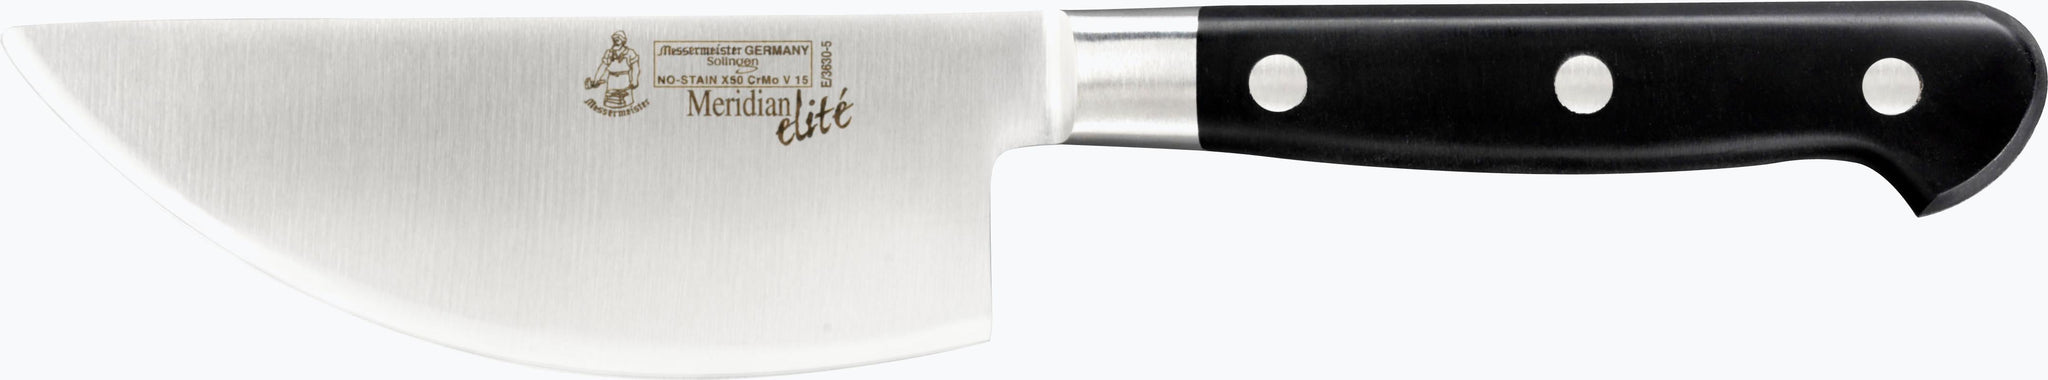 Messermeister Specialty Knives